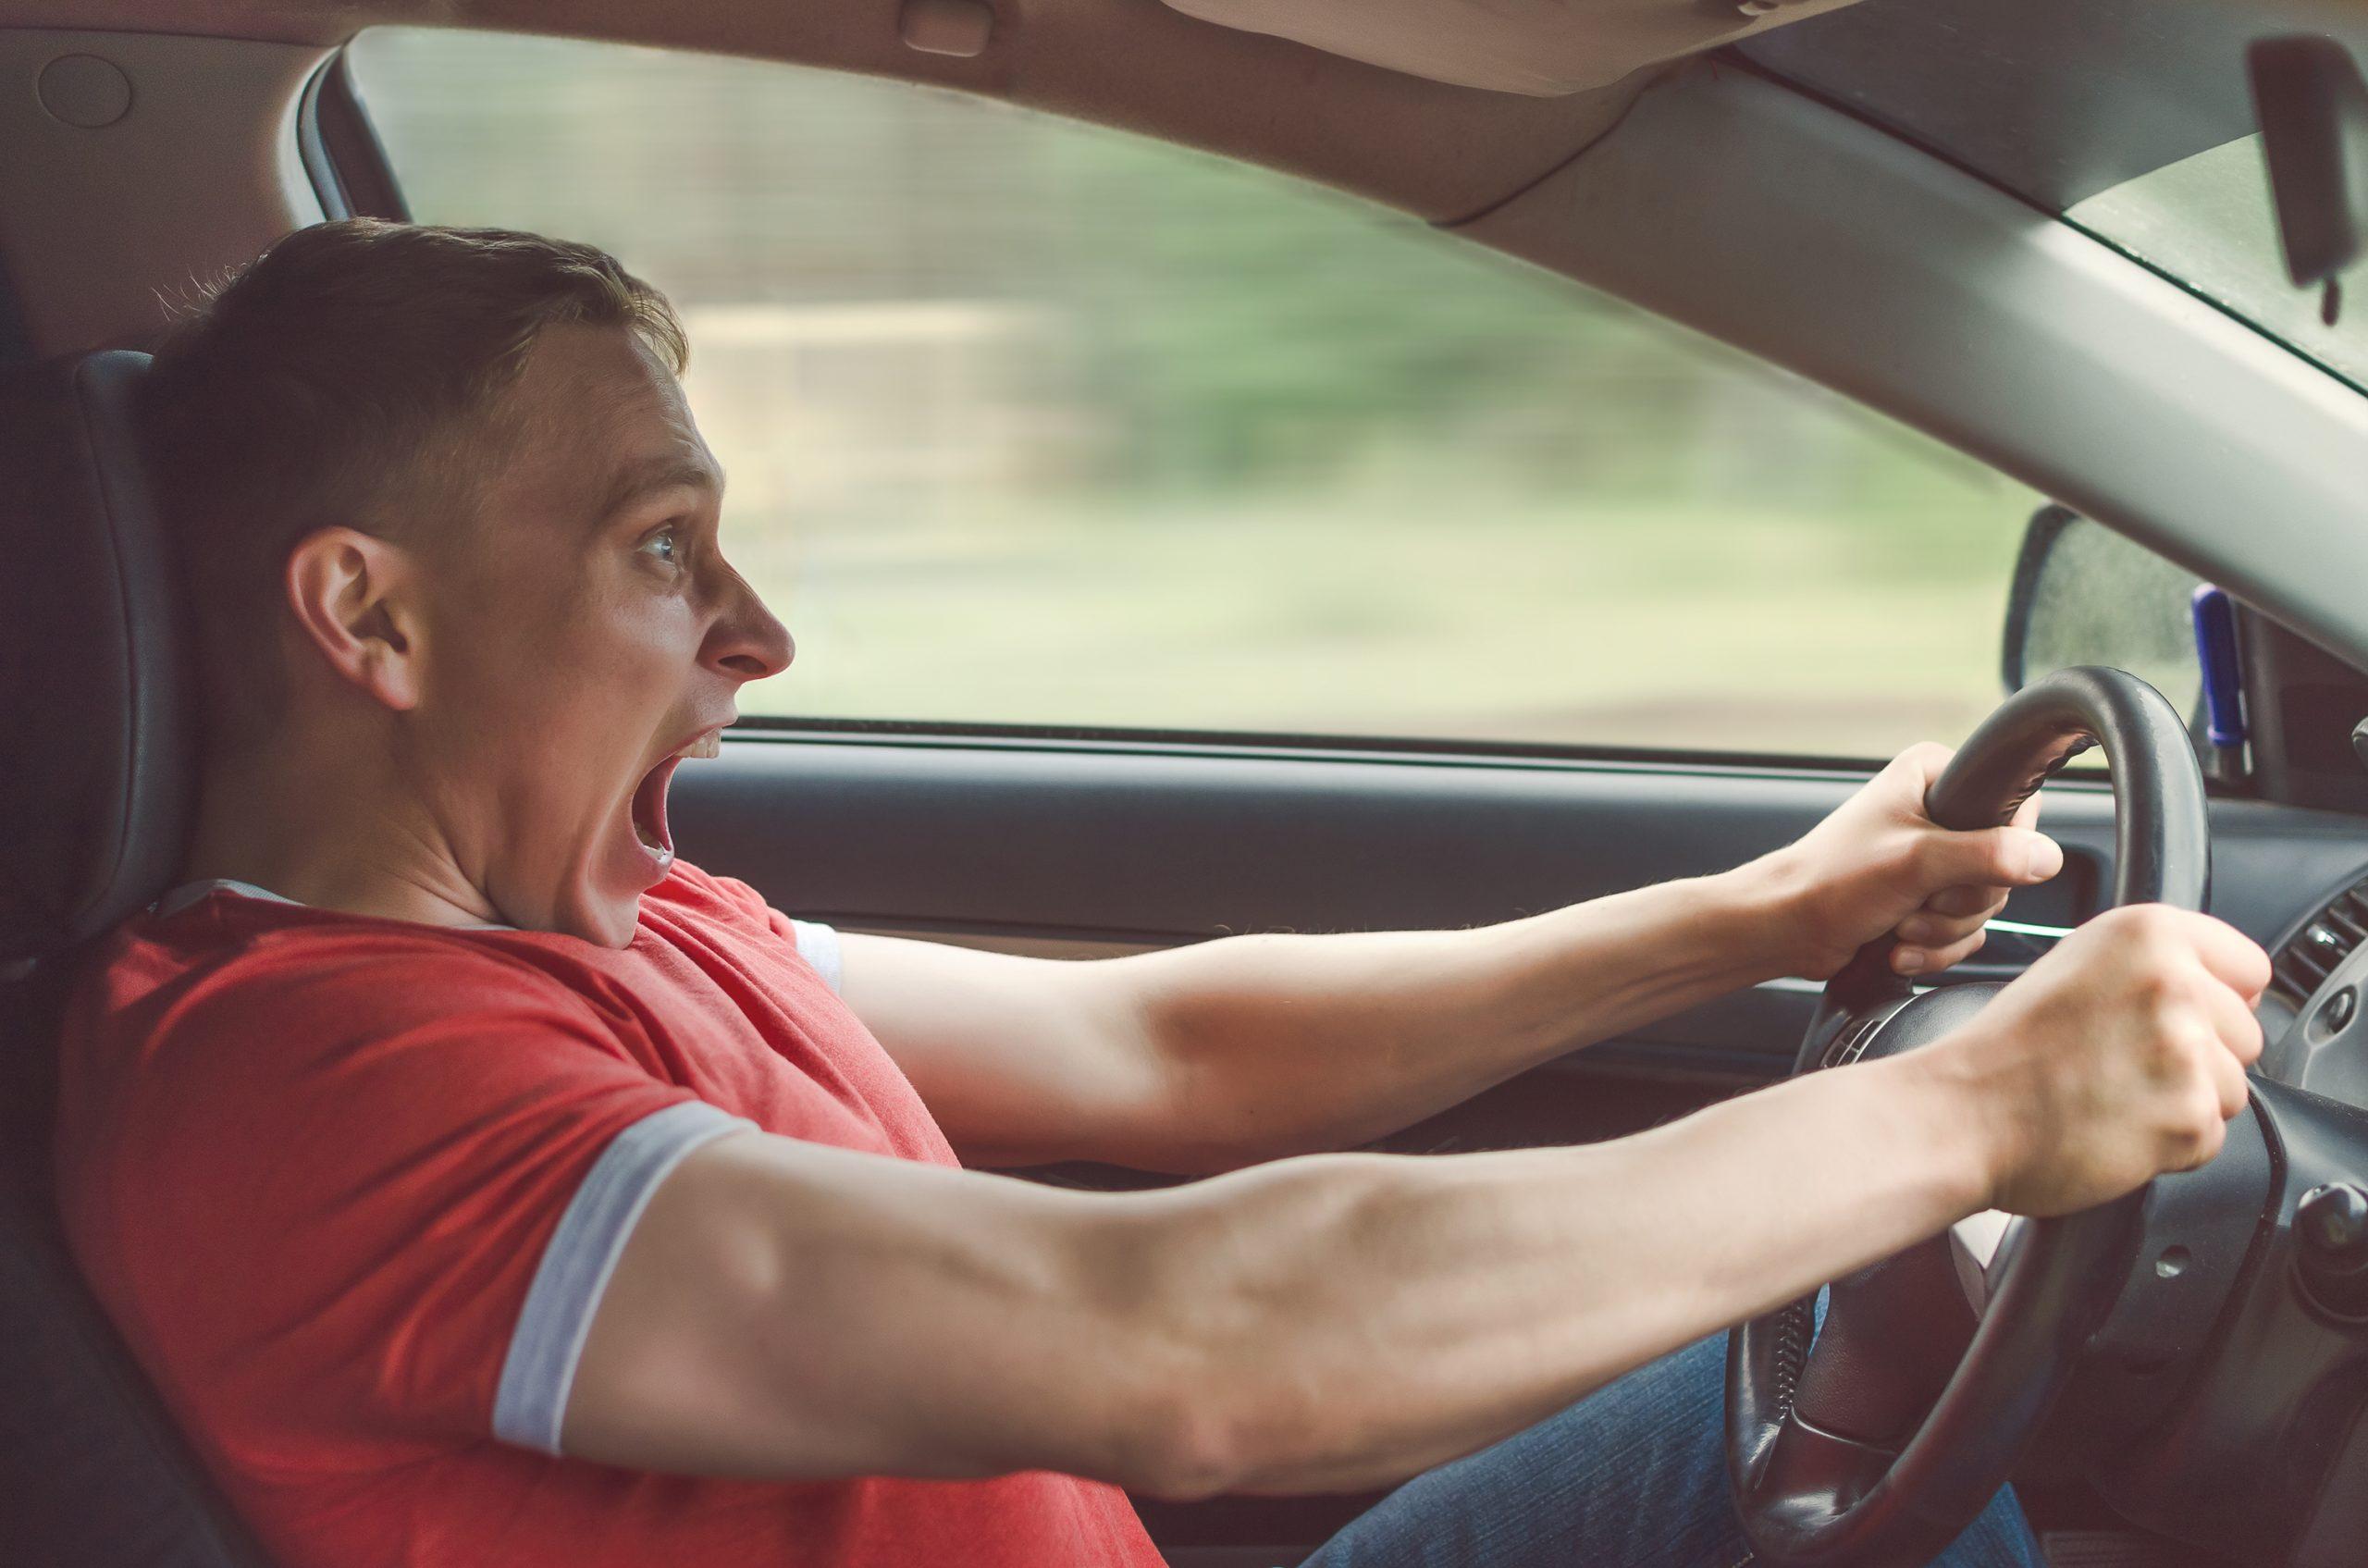 Image of a man driving a car stomping on the brakes